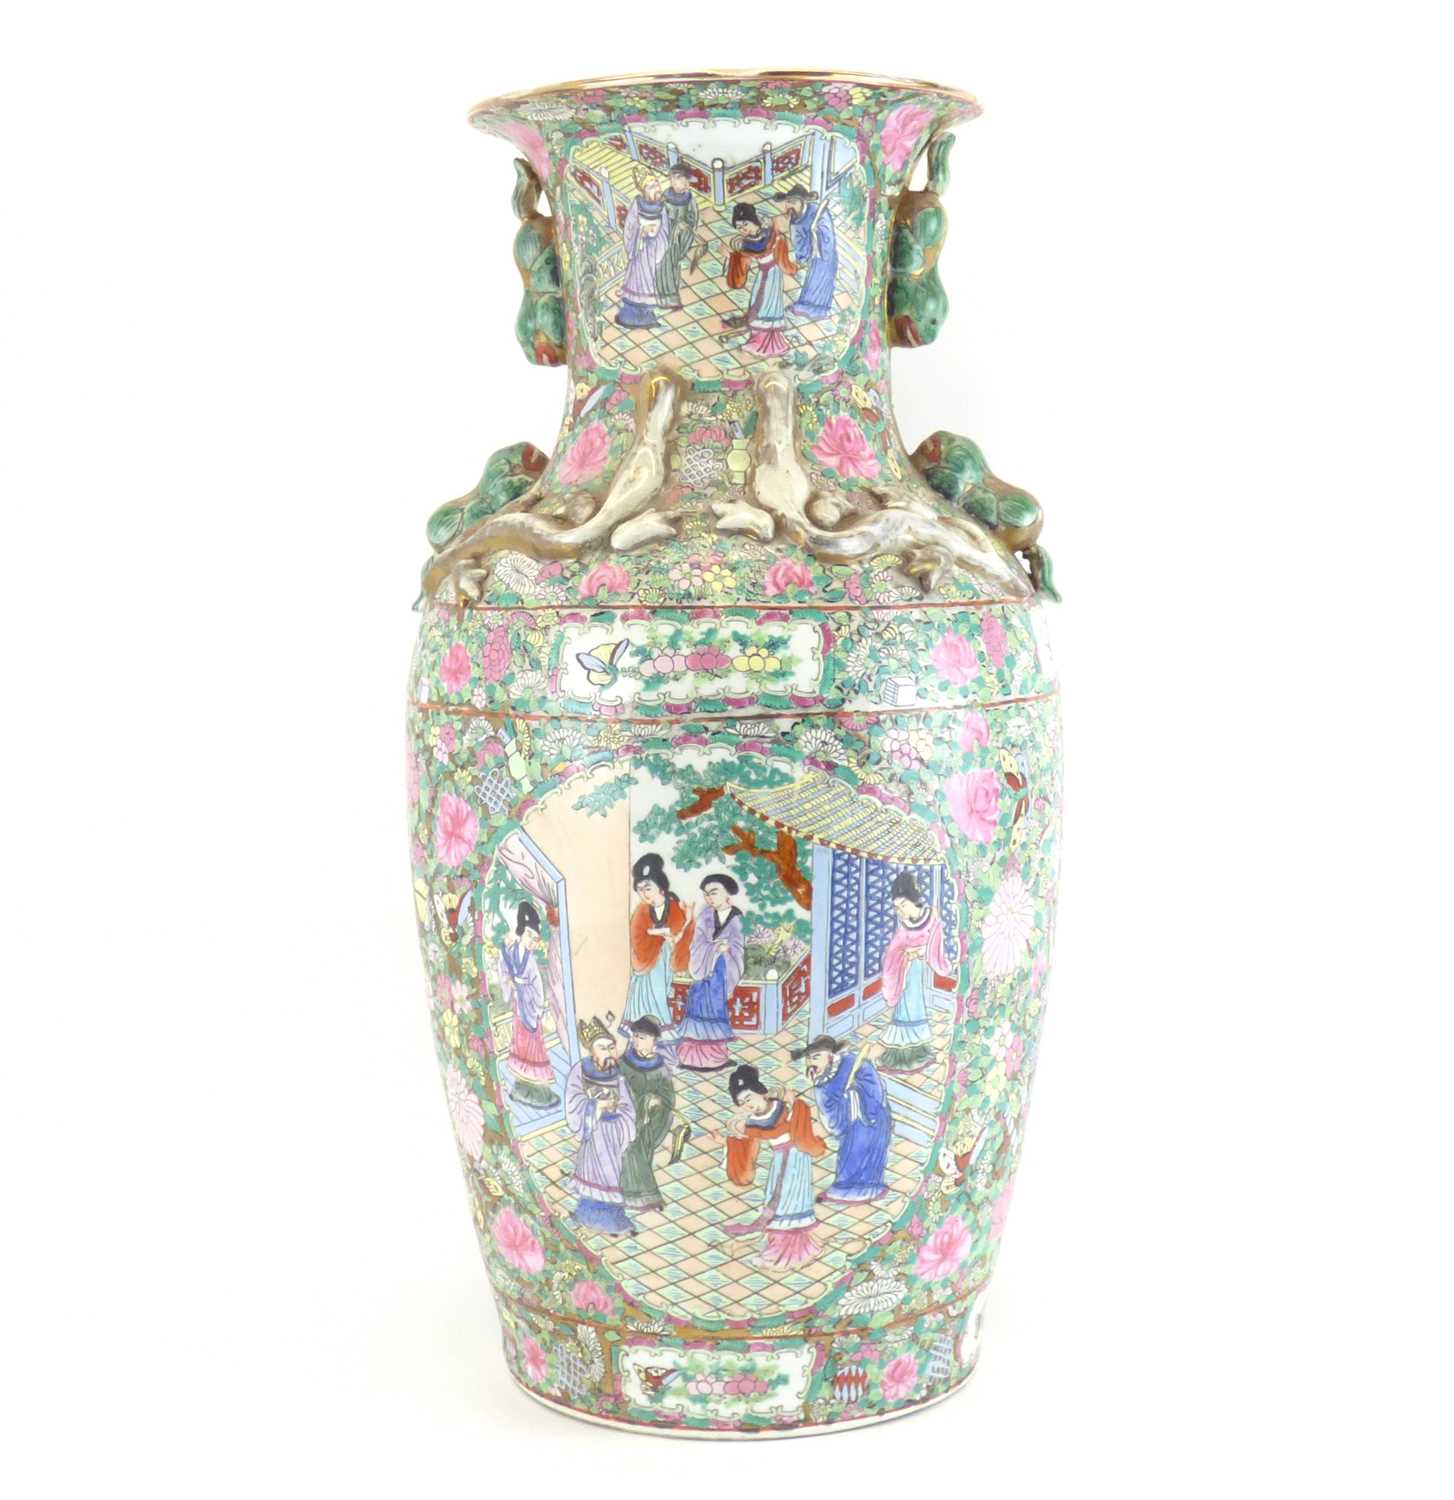 A large late 19th/early 20th century Canton Famille Rose baluster vase with flared neck decorated